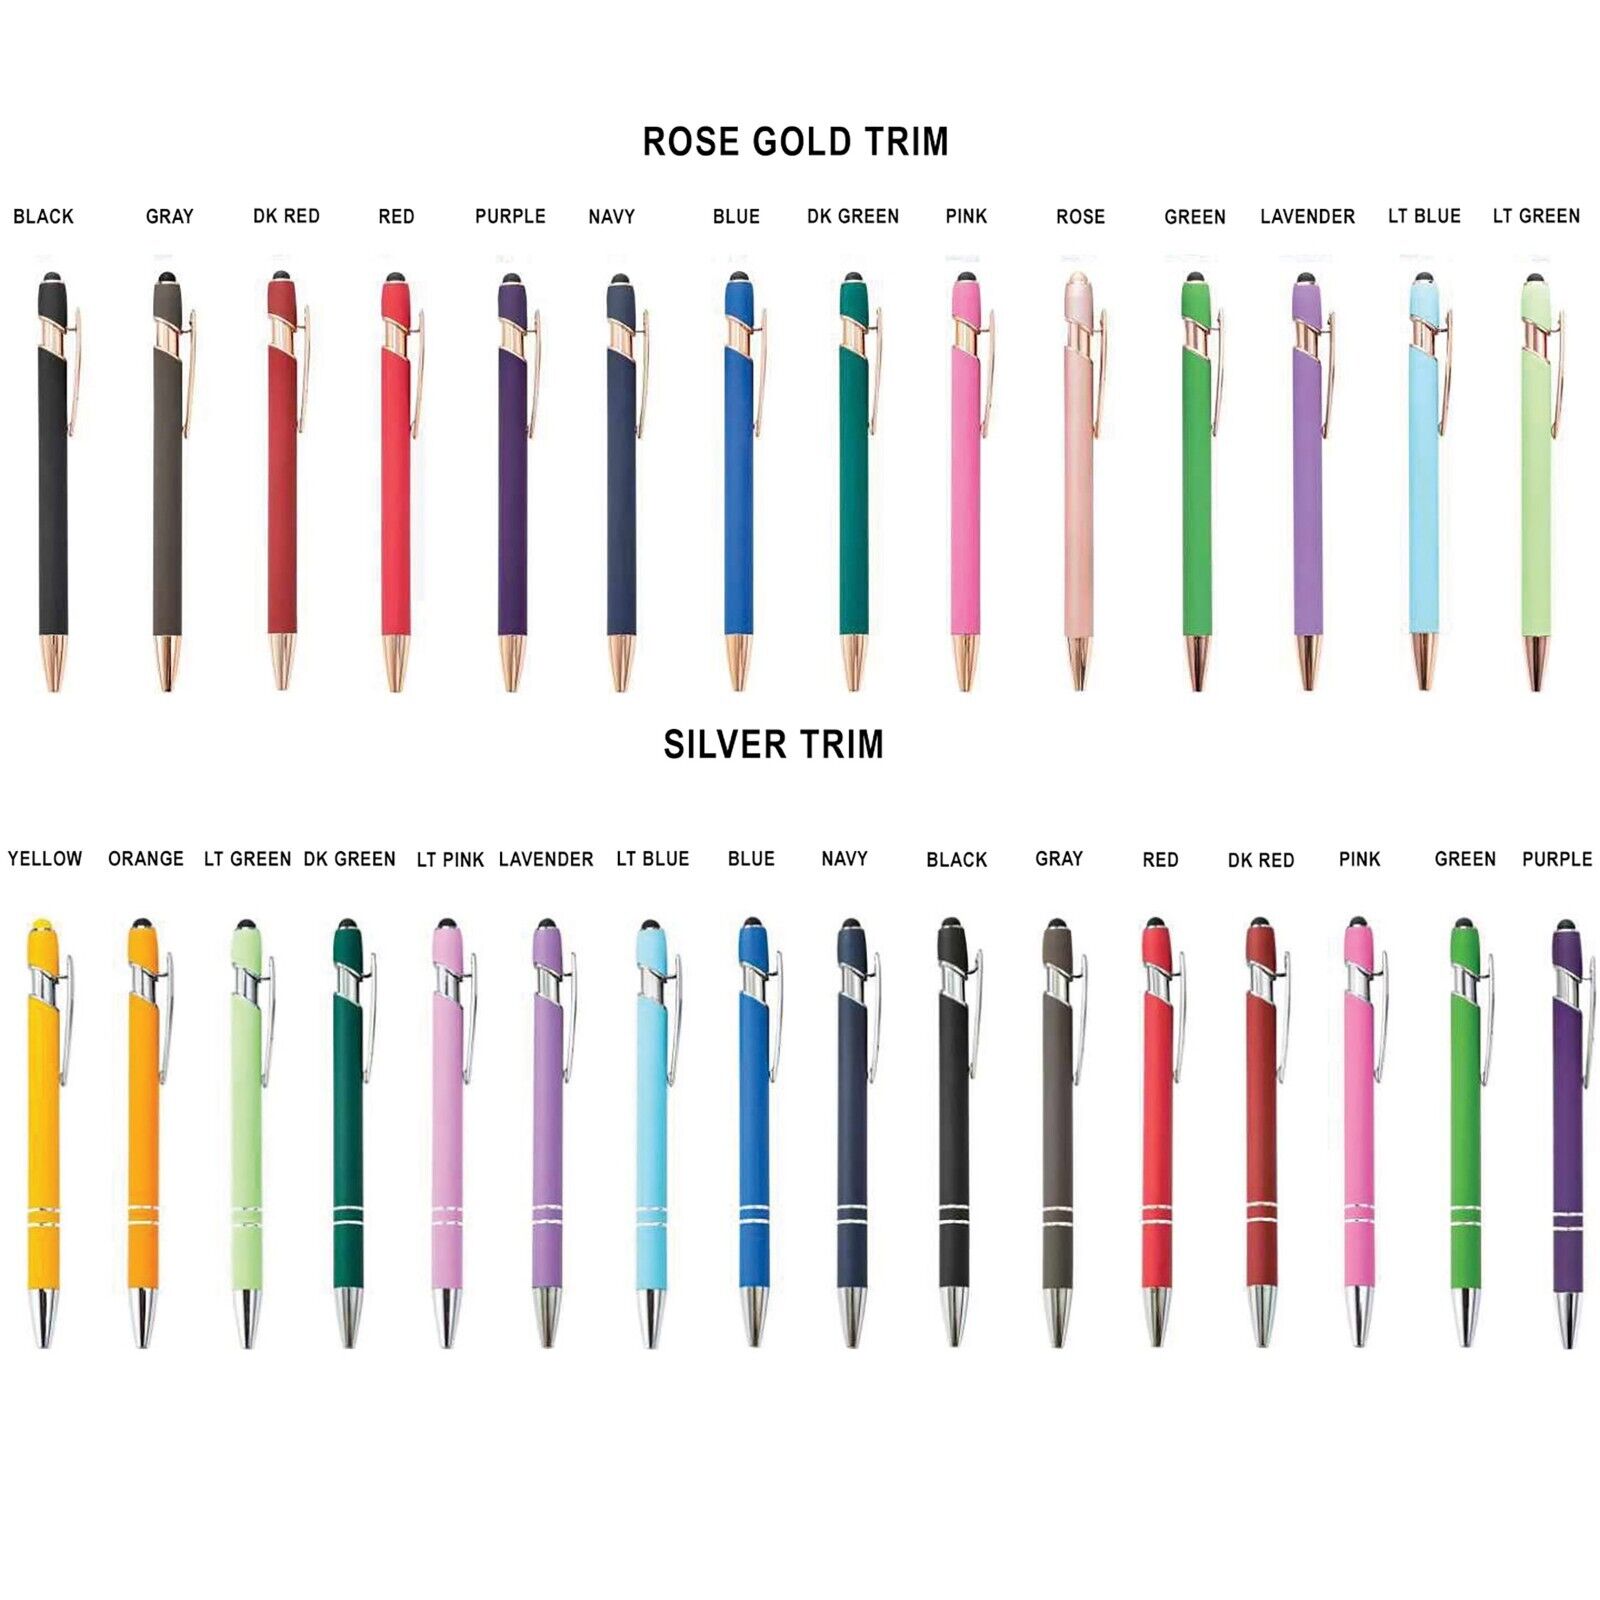 USA Personalized Stylus Ballpoint Metal Pen Customized Name Personal Or Business